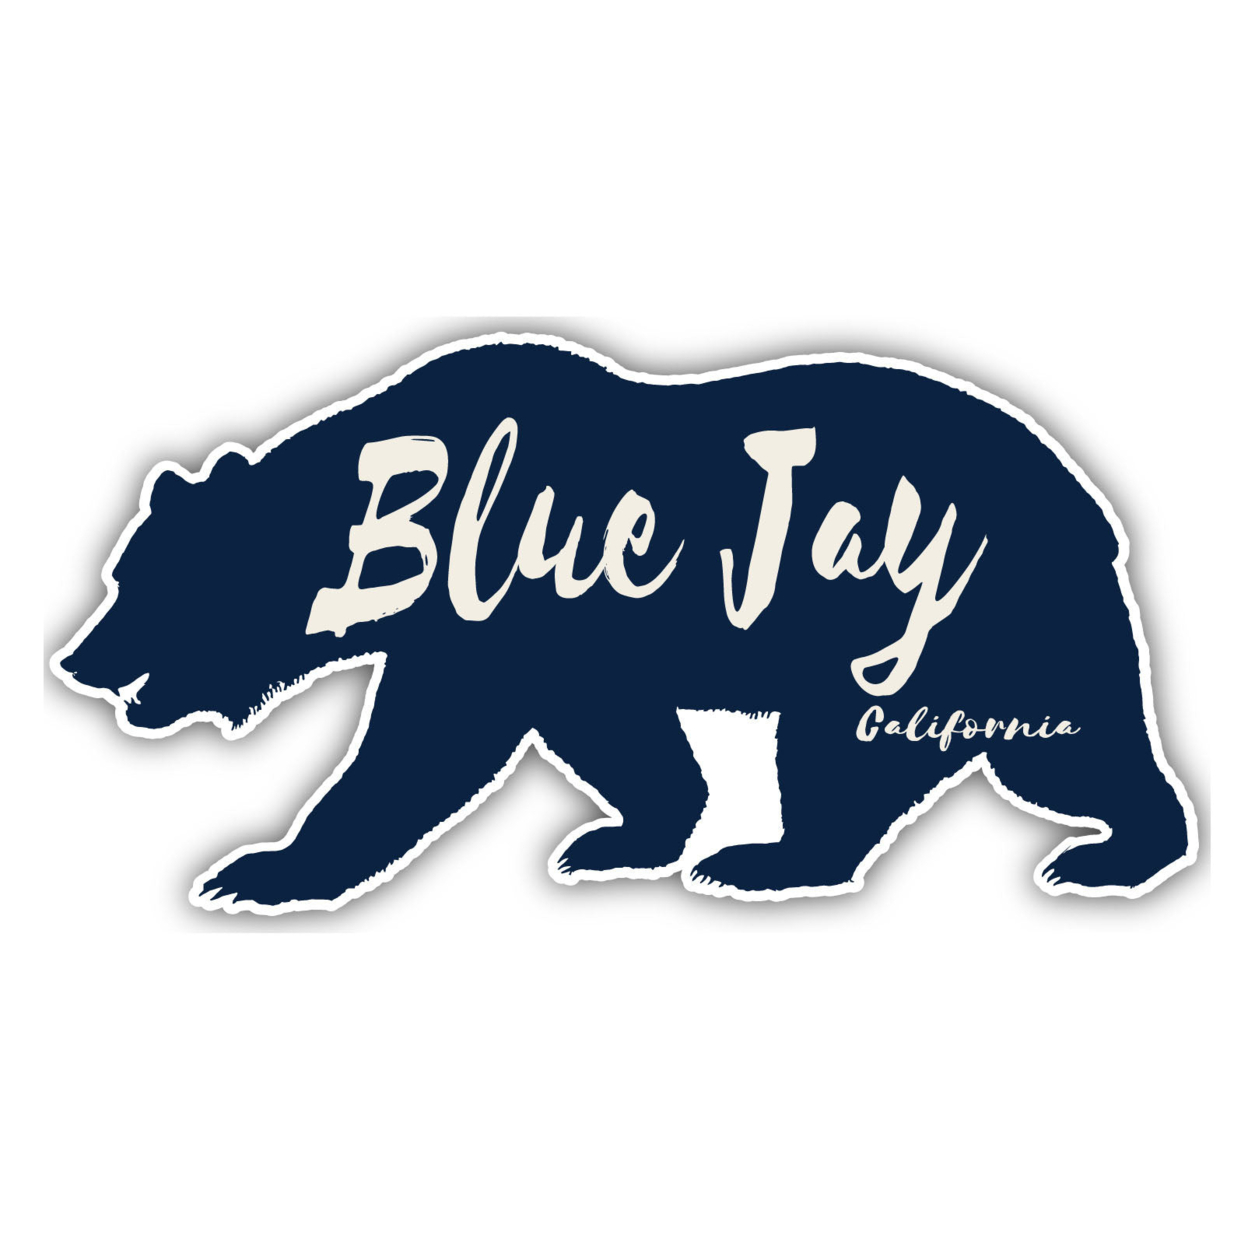 Blue Jay California Souvenir Decorative Stickers (Choose Theme And Size) - 4-Pack, 8-Inch, Bear